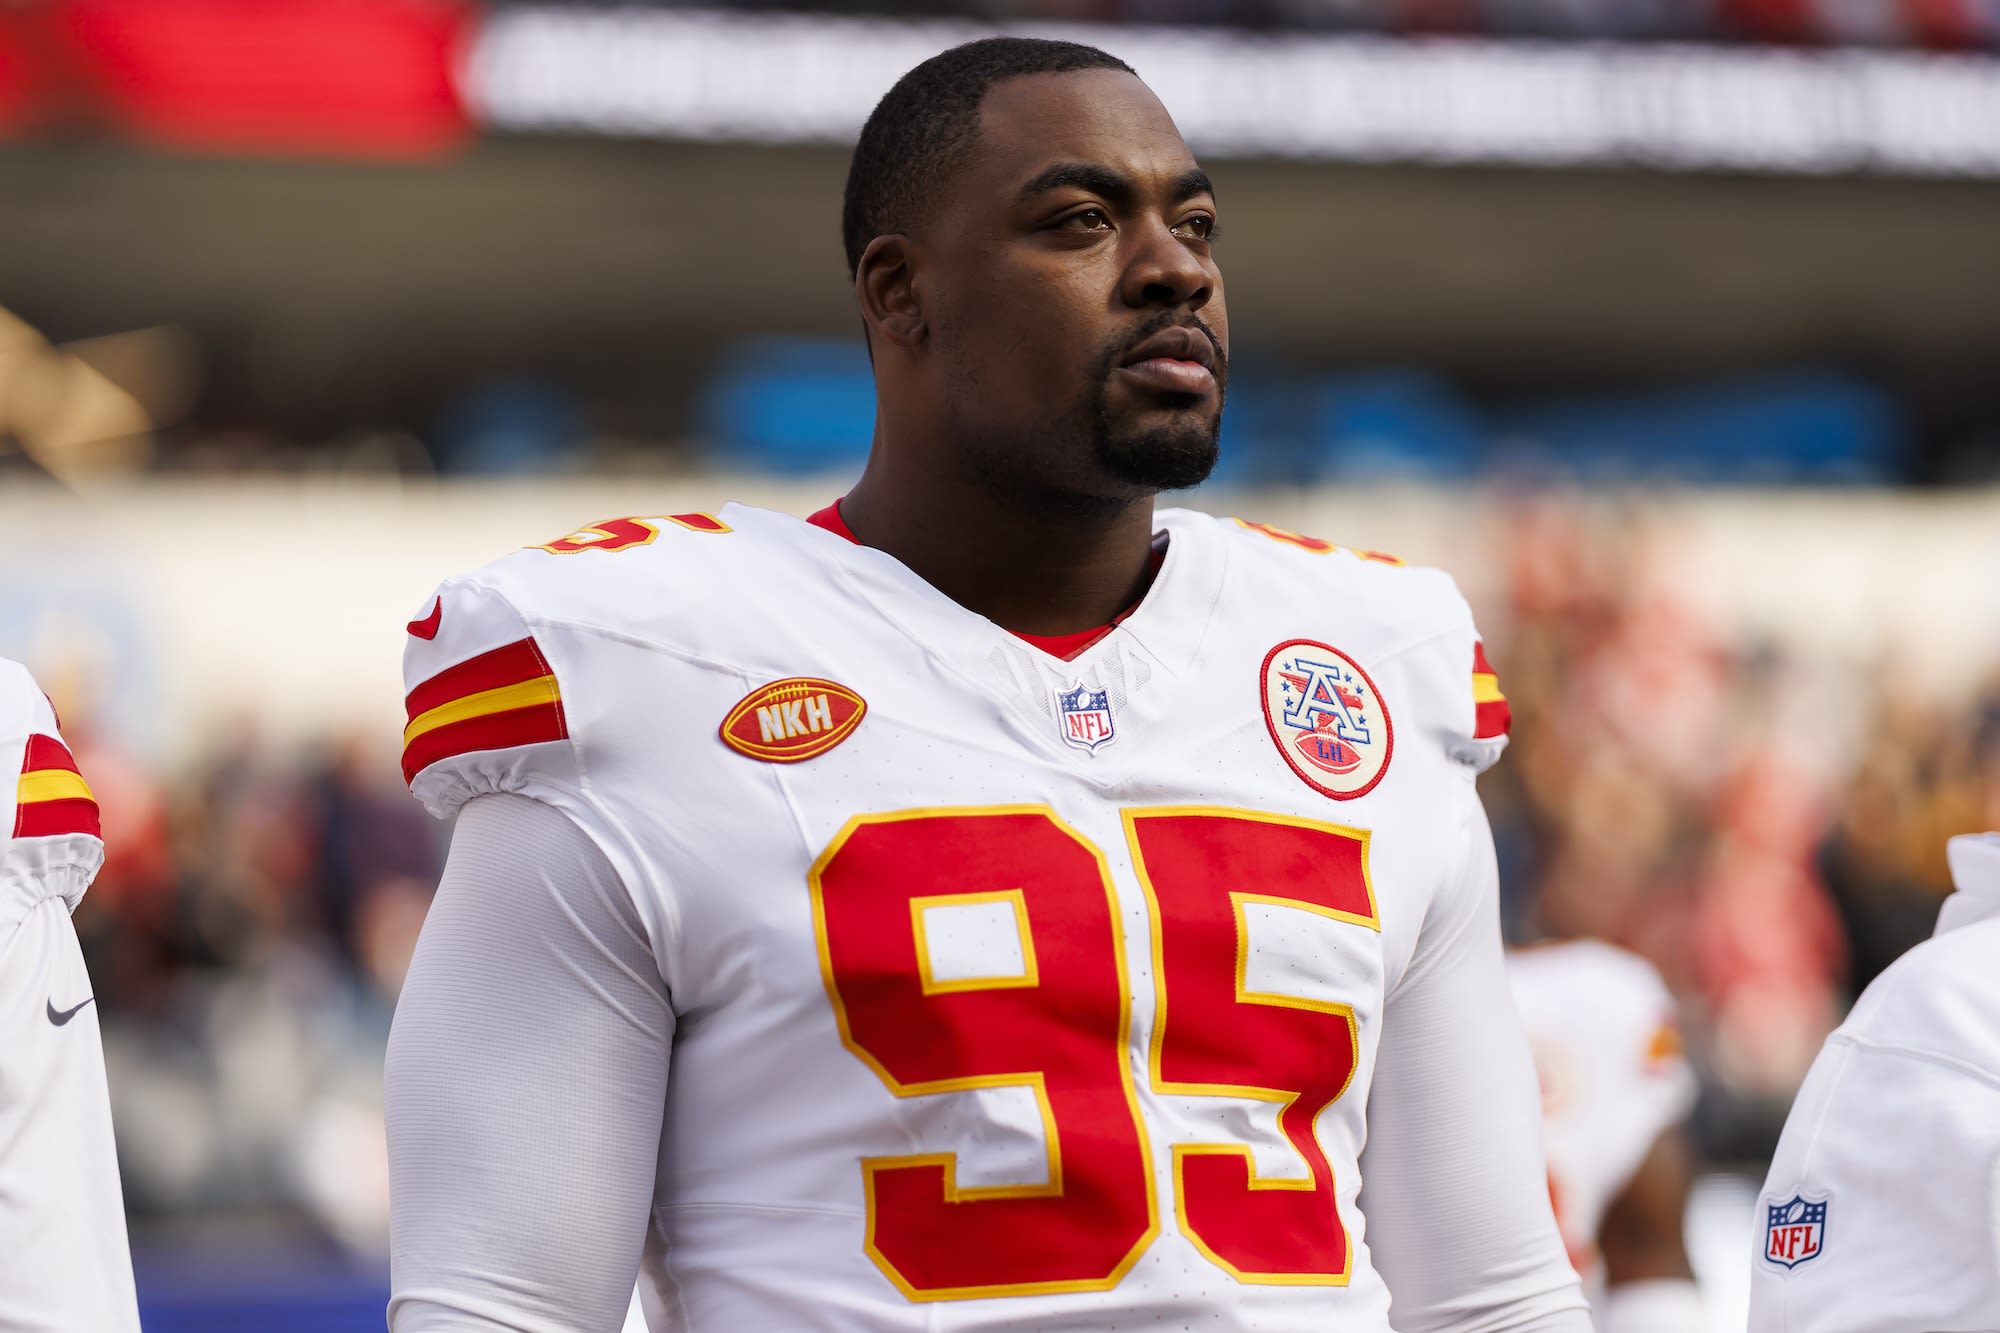 Chiefs Star Chris Jones Shows Support to Harrison Butker Amid Backlash, Petition Over Speech